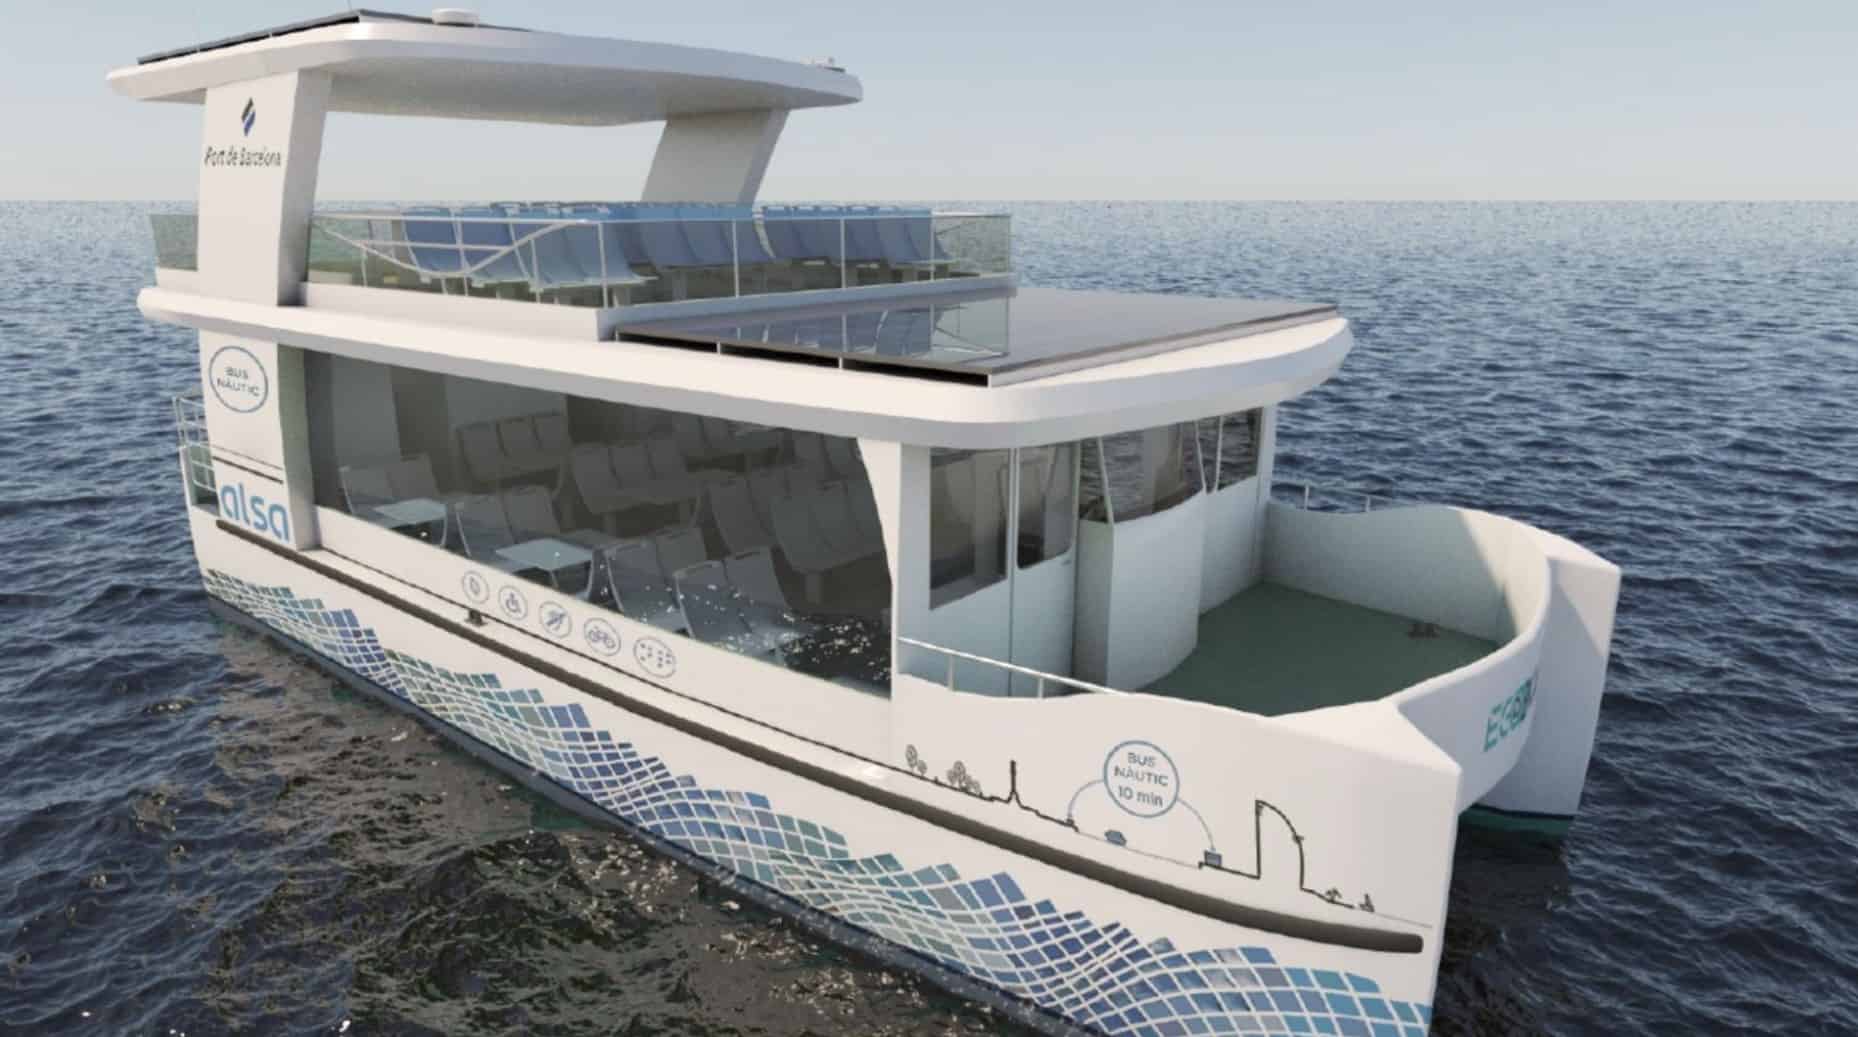 Barcelona to introduce an innovative Nautical Bus service: more economical than the metro